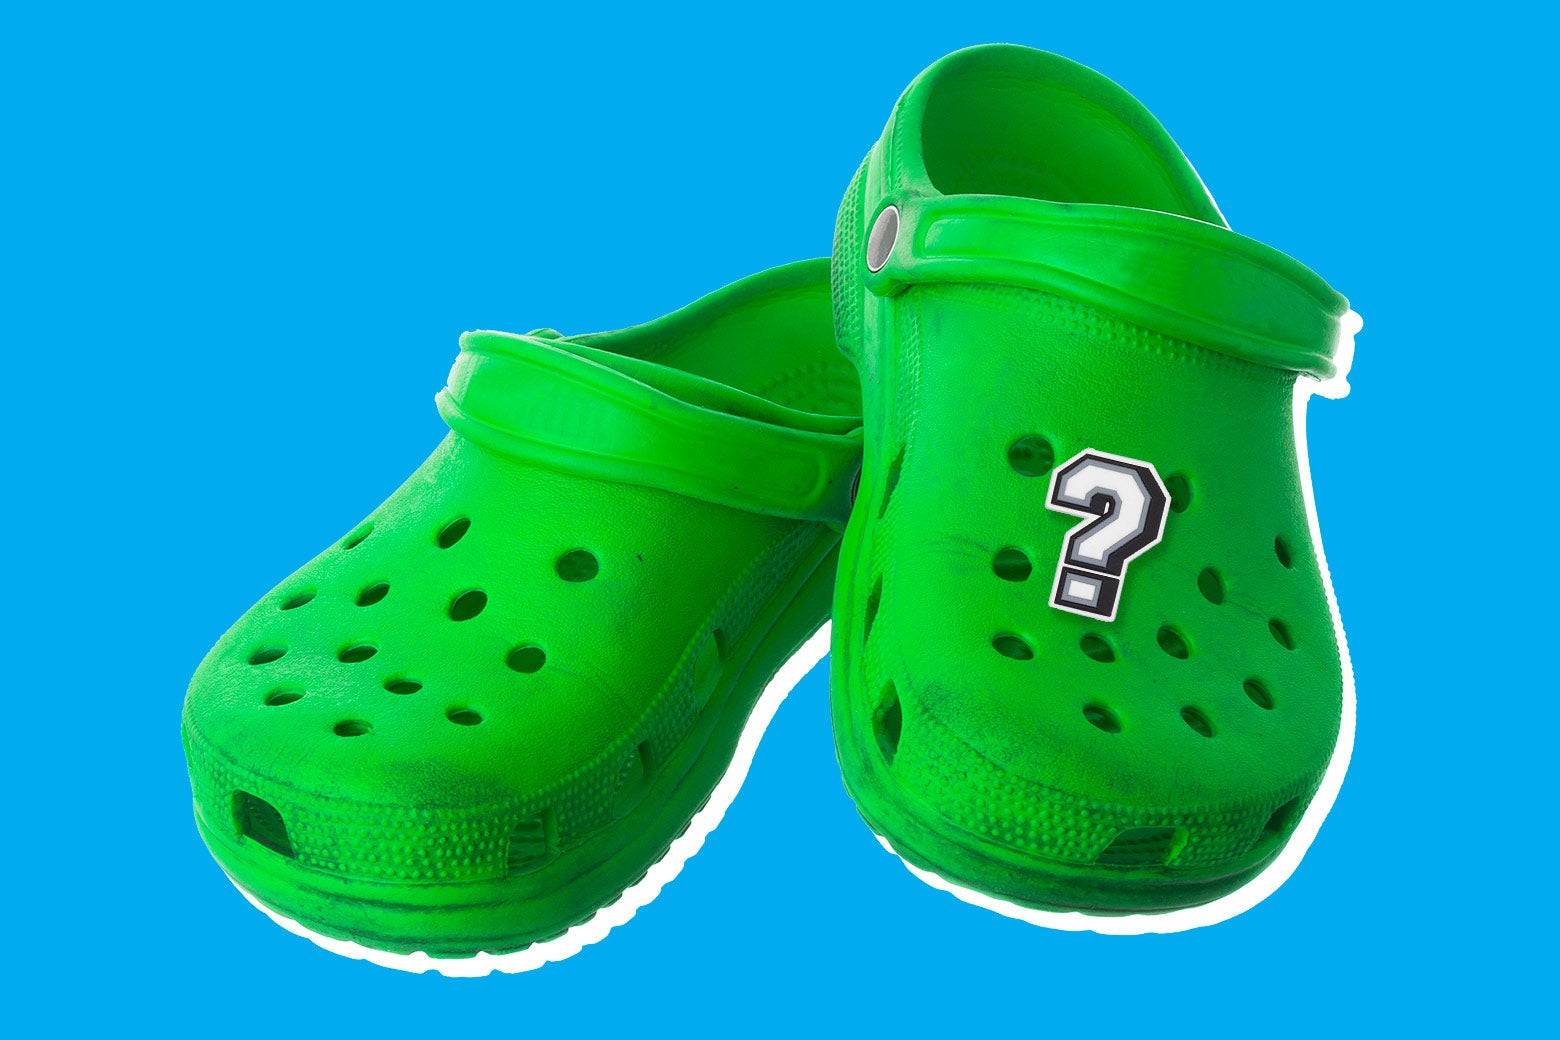 A pair of green Croc clogs with a question-mark button.